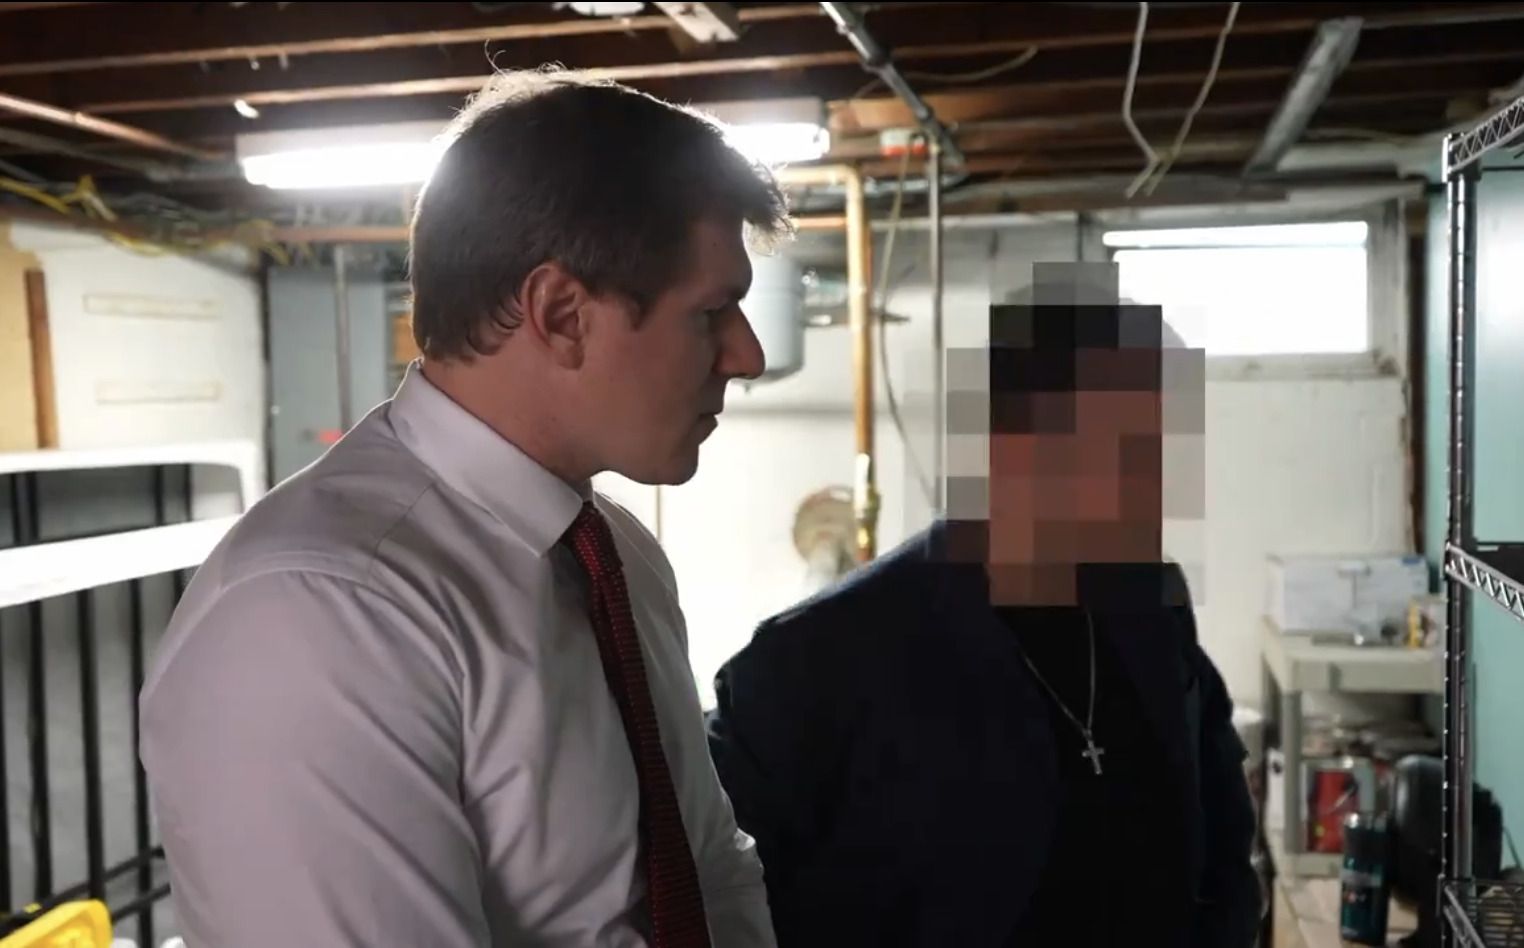 WATCH: James O’Keefe EXPOSES Anti-Trump CIA Plot In ‘Biggest’ Story Of His Career